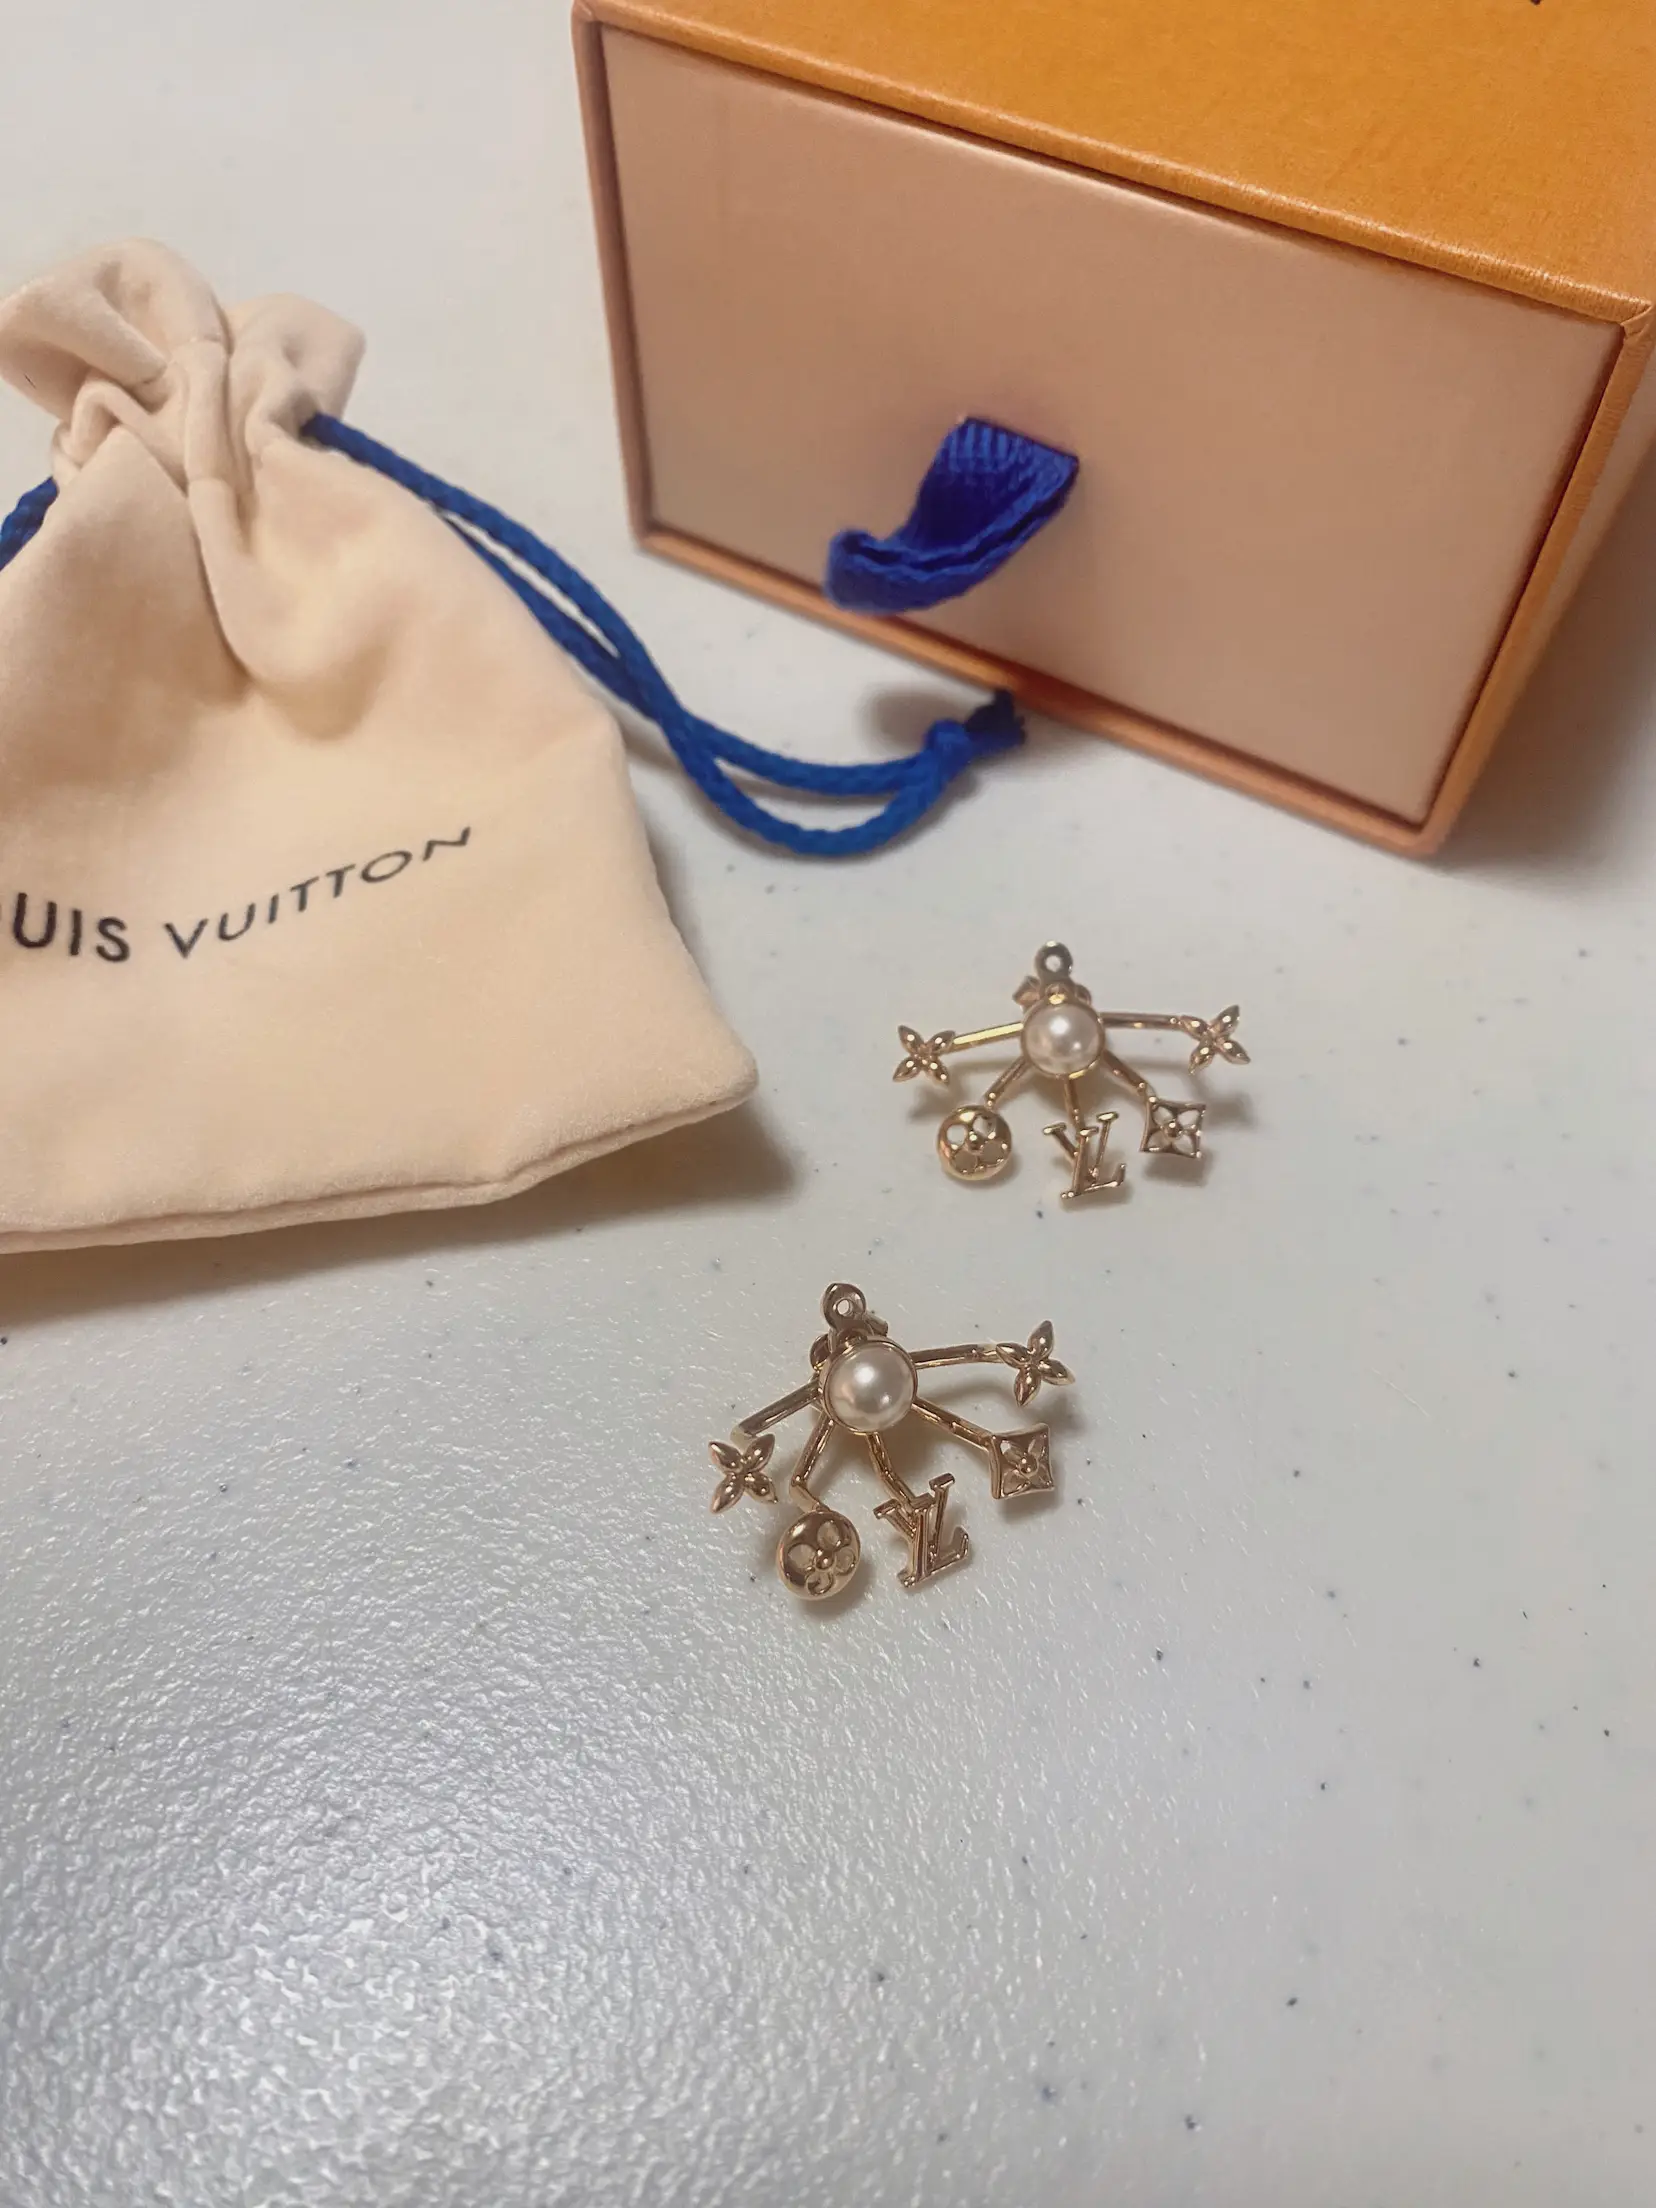 LOUIS VUITTON, a pir of 'Love letter' earrings and a necklace